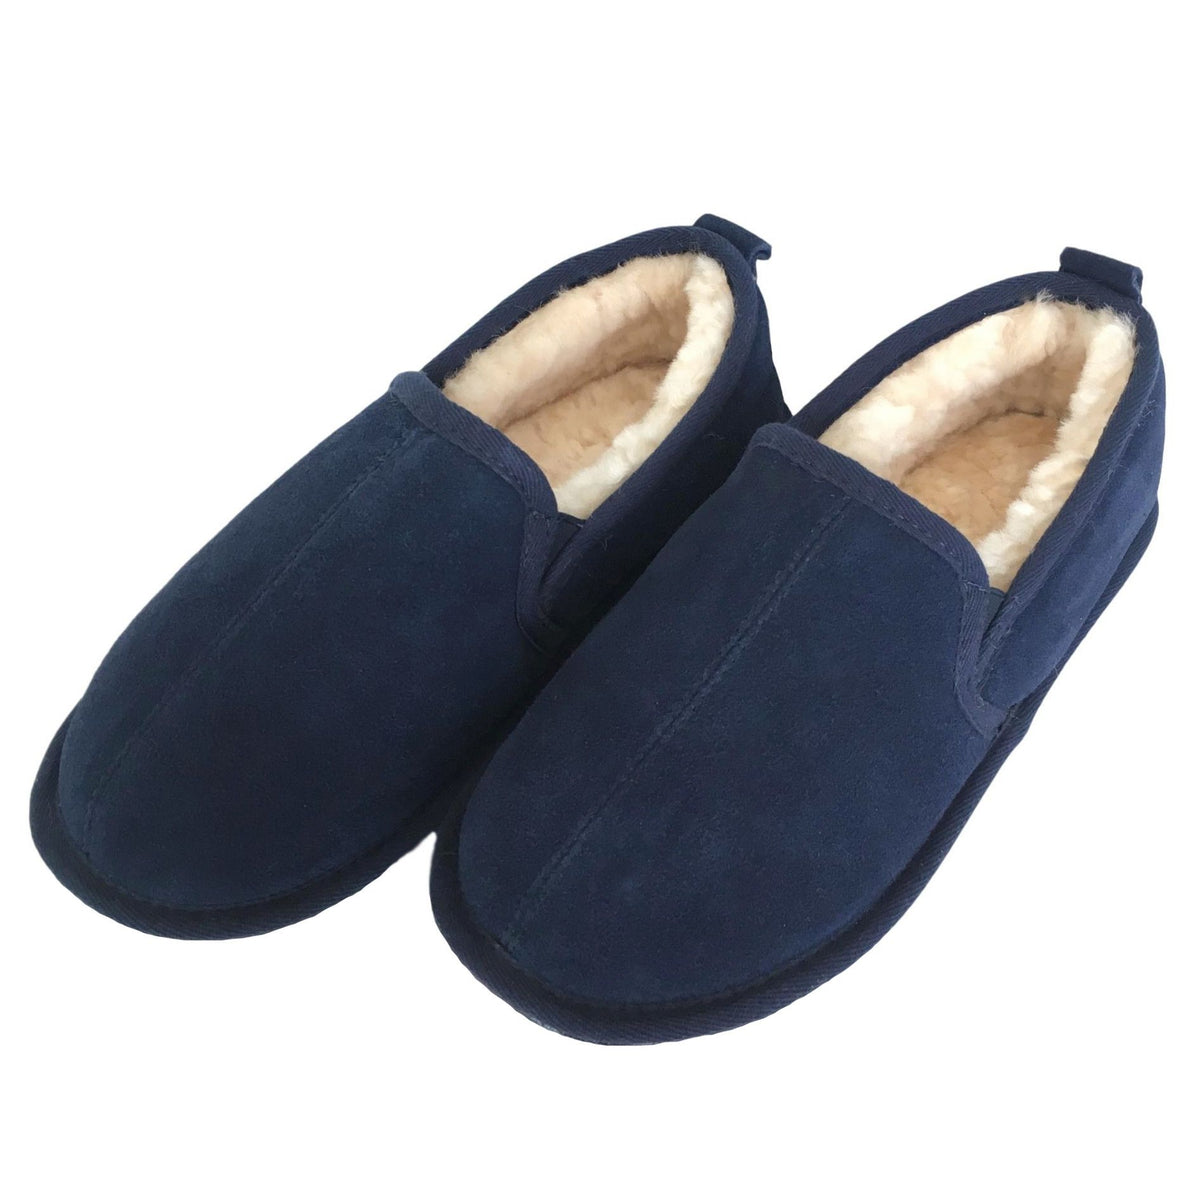 Deluxe Mens 'Liam' Sheepskin Slippers with Soft Sole - Navy – Sheepskin ...